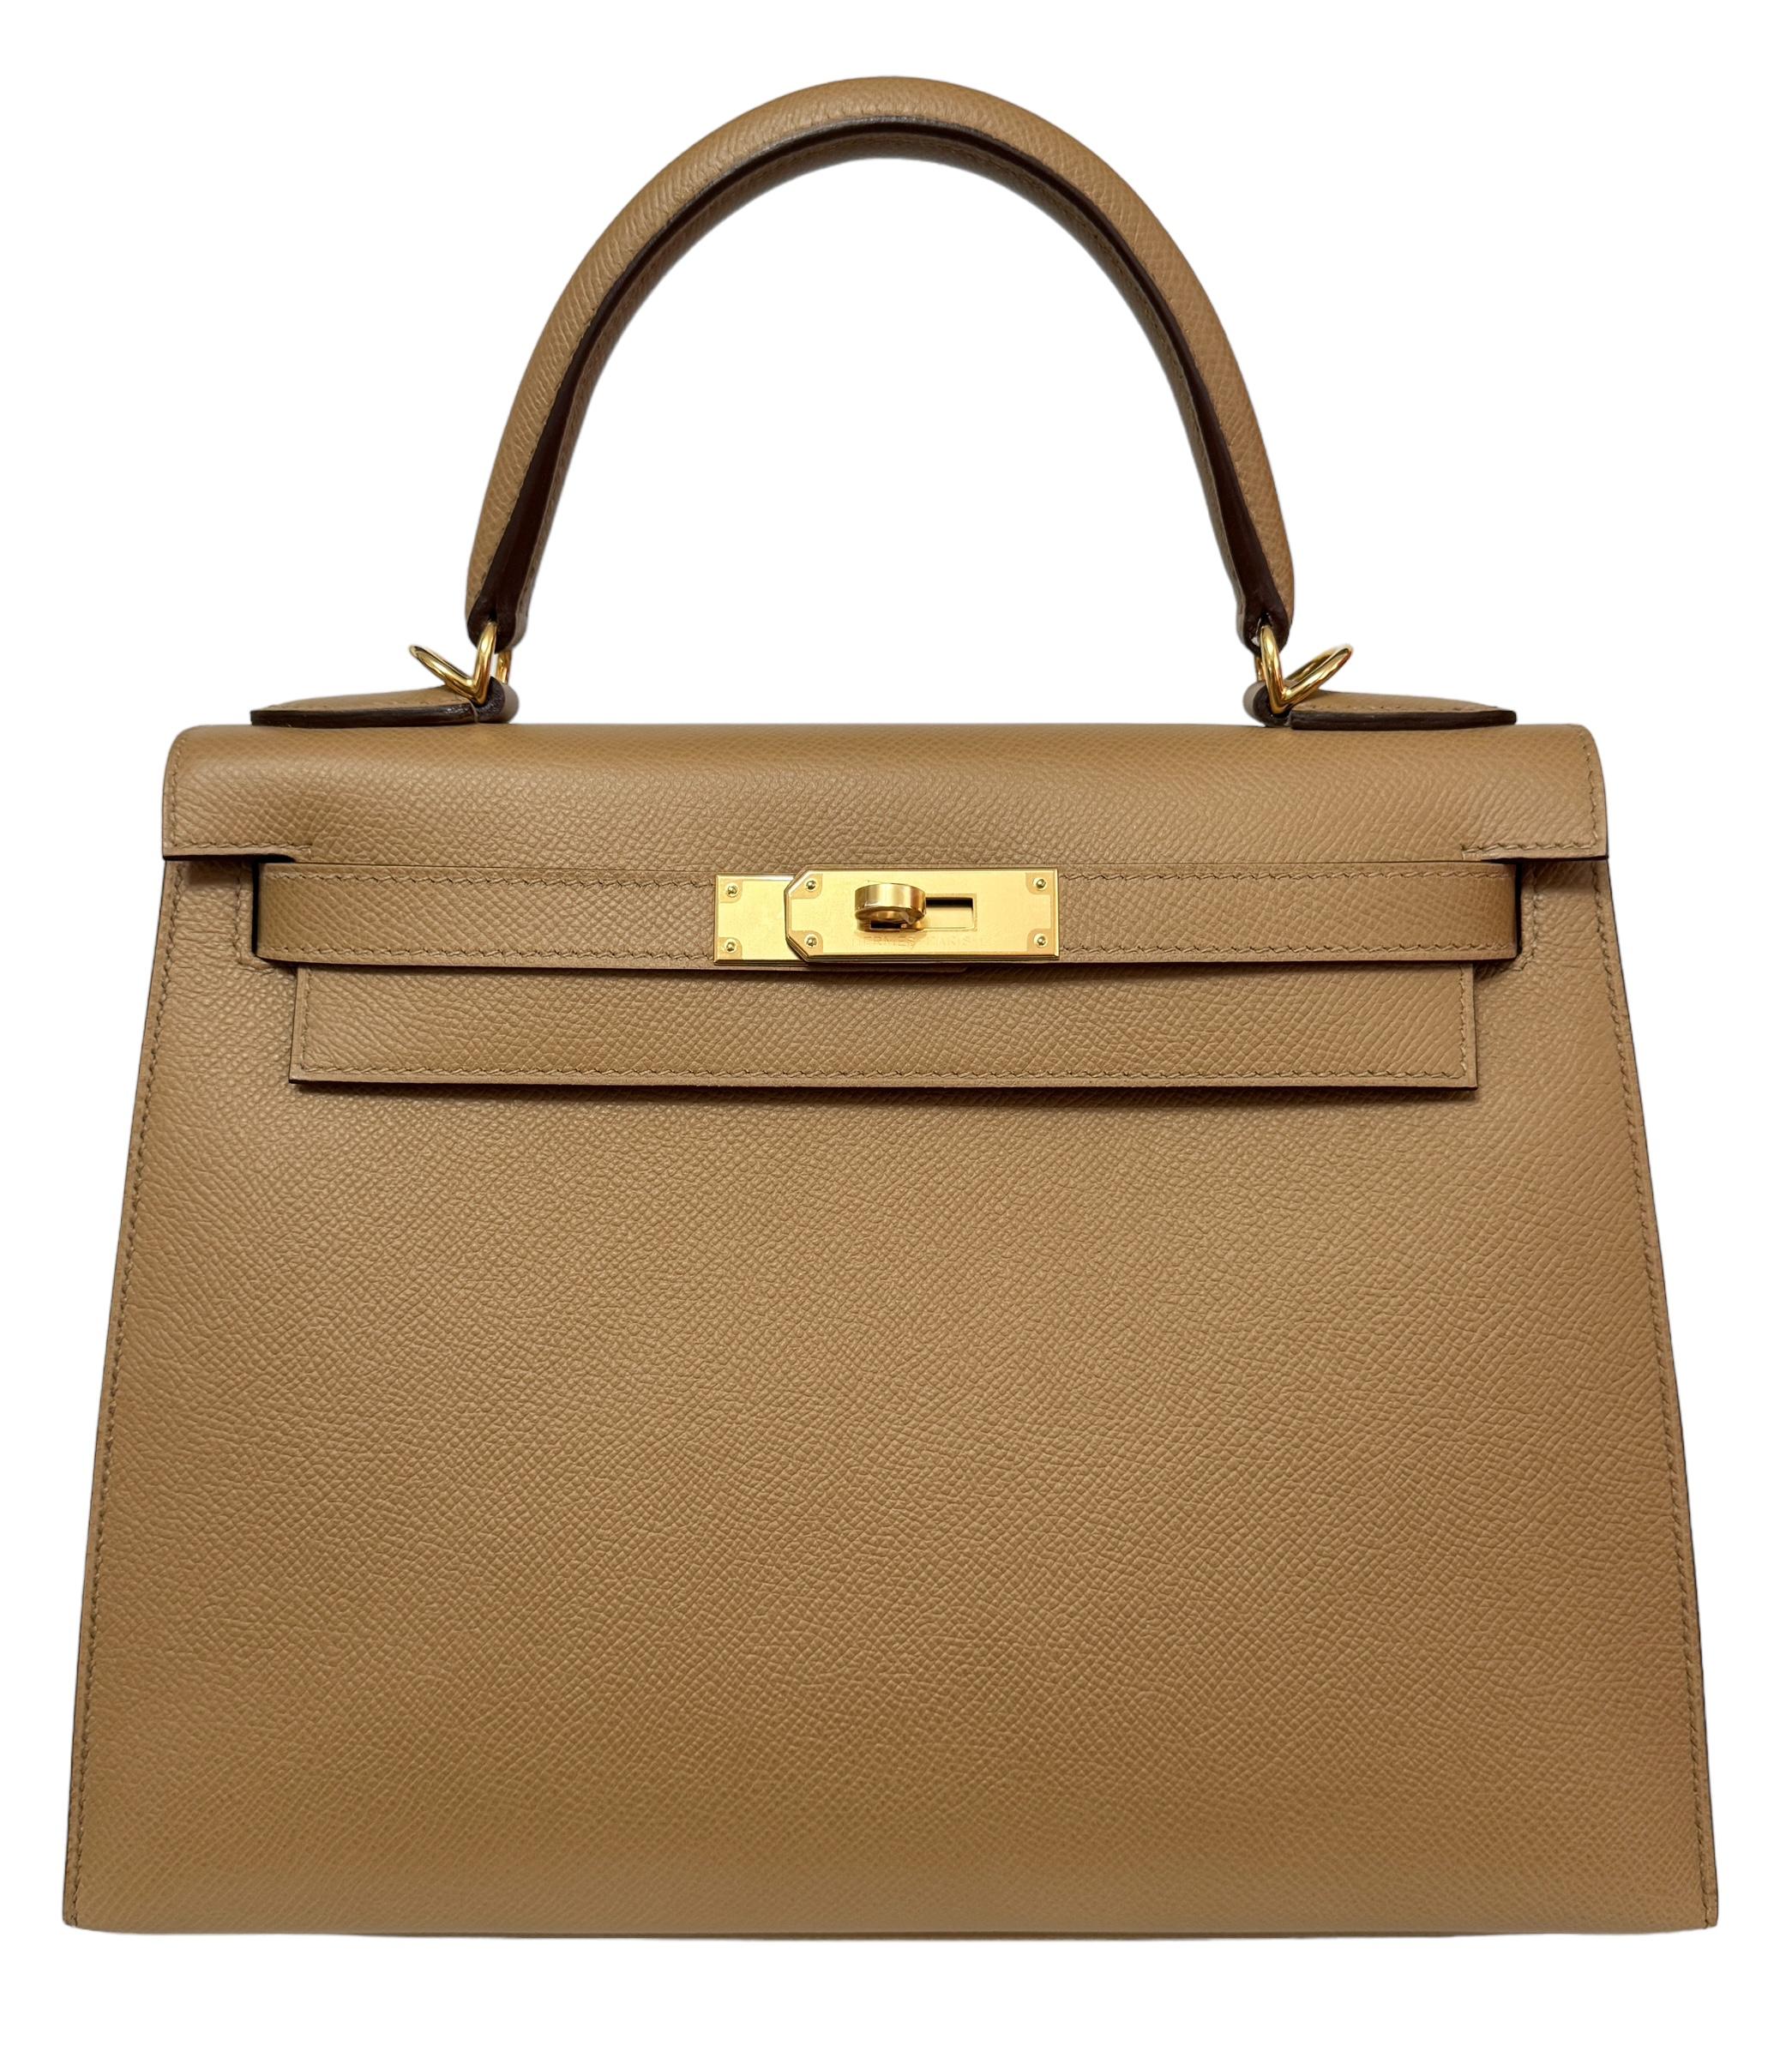 Absolutely Stunning Rare and Most Coveted As New Hermes Kelly 28 Sellier Biscuit Epsom Leather complimented by Gold Hardware. As New with Plastic on all hardware and feet. 2022 U Stamp. 

Shop with Confidence from Lux Addicts. Authenticity